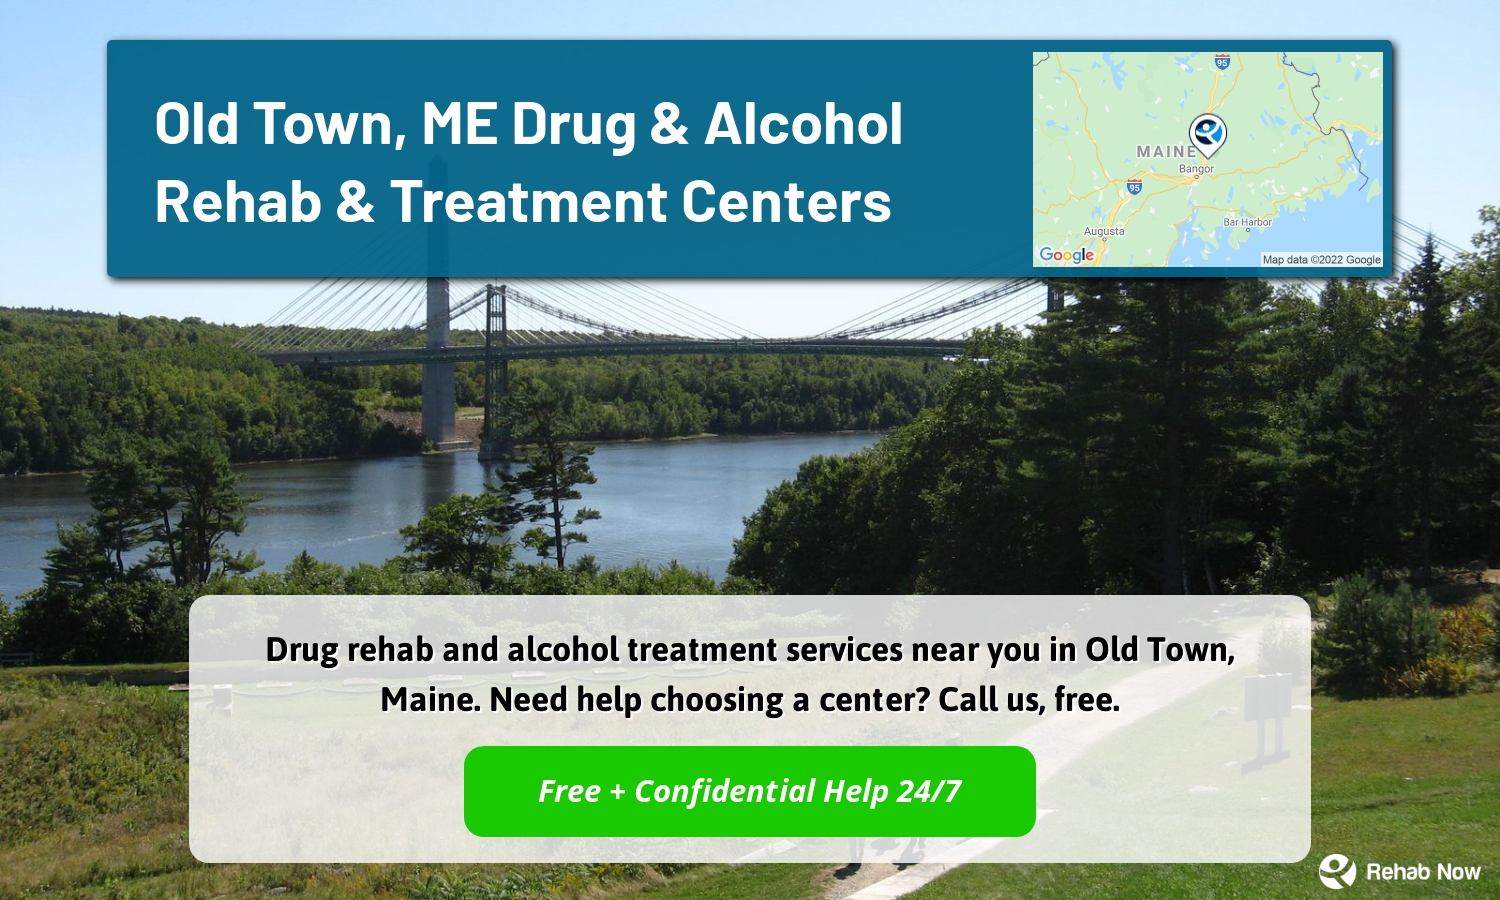 Drug rehab and alcohol treatment services near you in Old Town, Maine. Need help choosing a center? Call us, free.